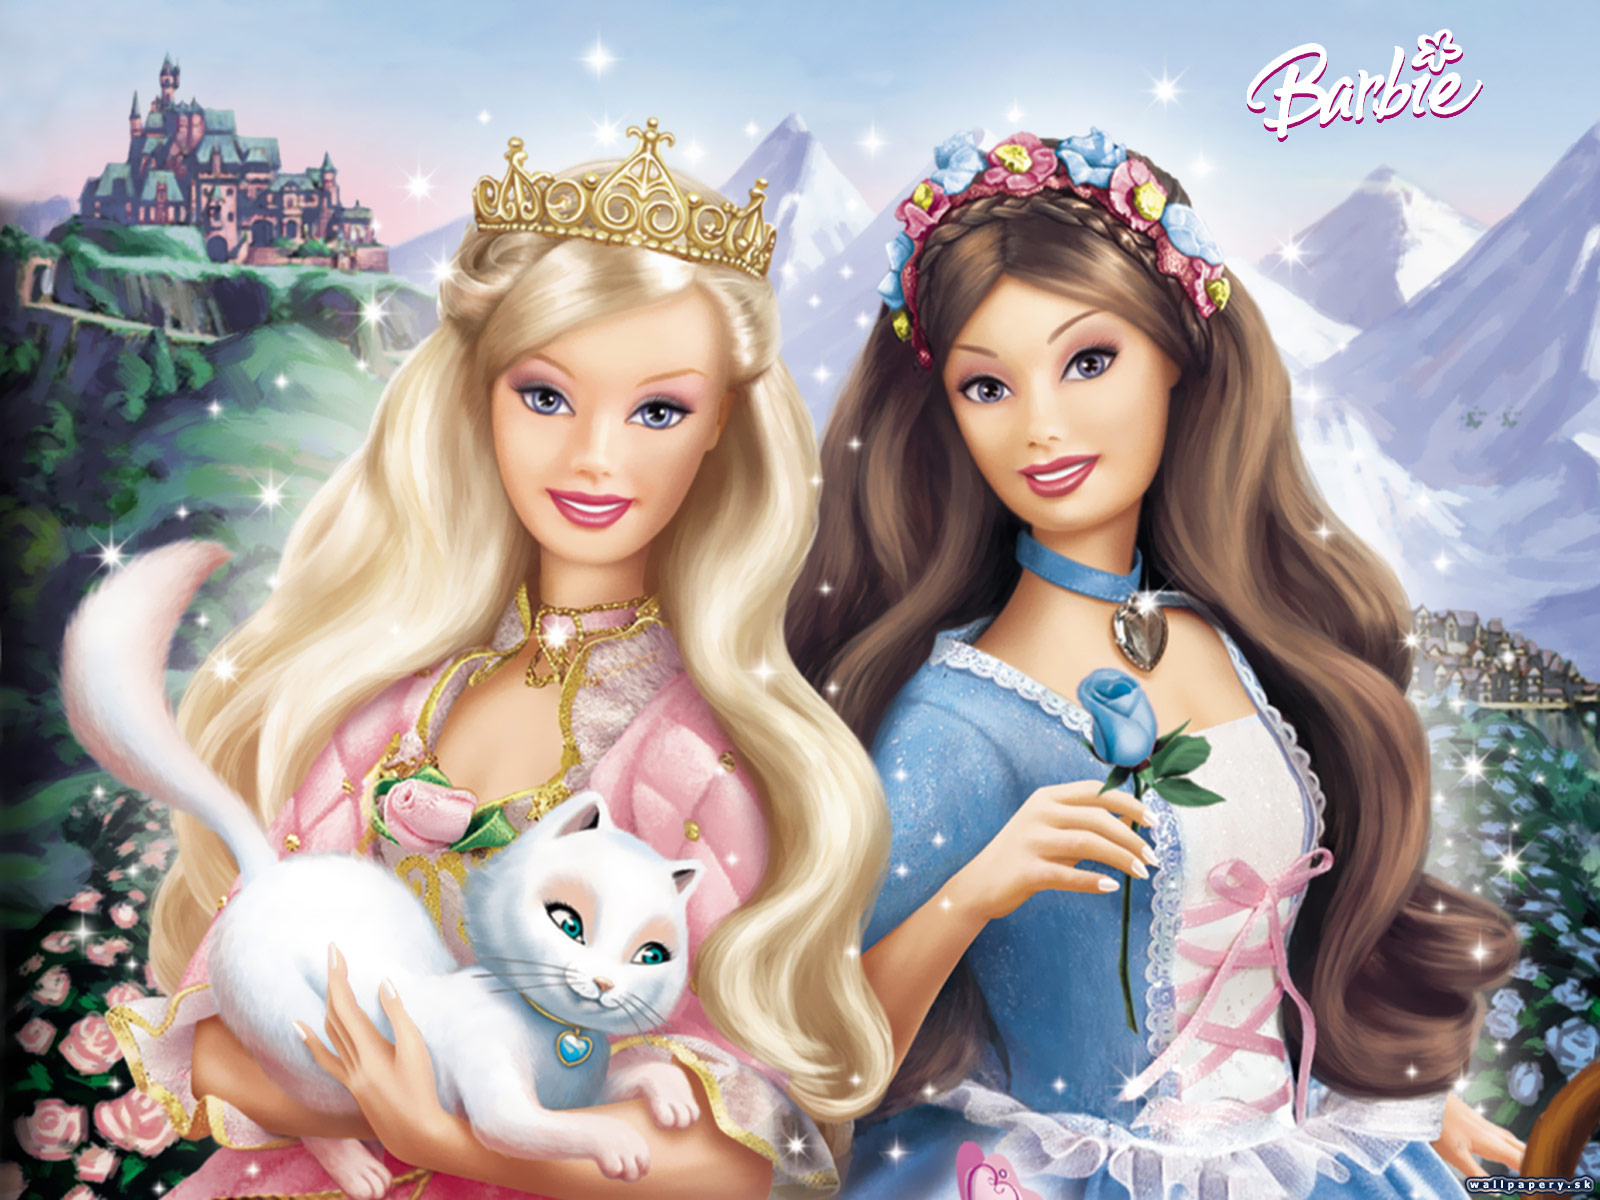 Barbie as the Princess and the Pauper - wallpaper 1